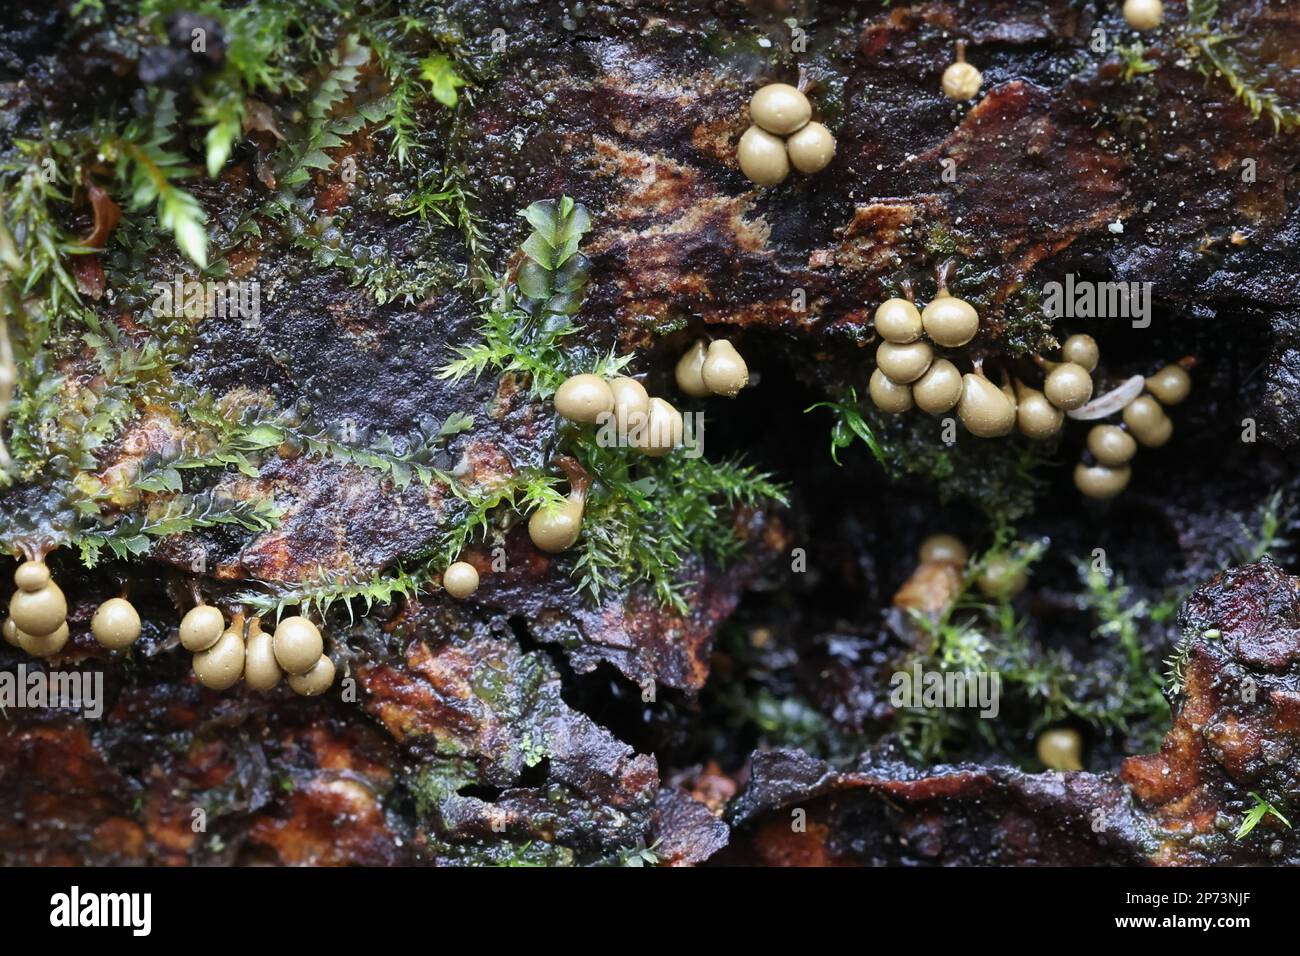 Trichia crateriformis, previoulsy known as  Trichia decipiens var. olivacea, slime mold from Finland Stock Photo